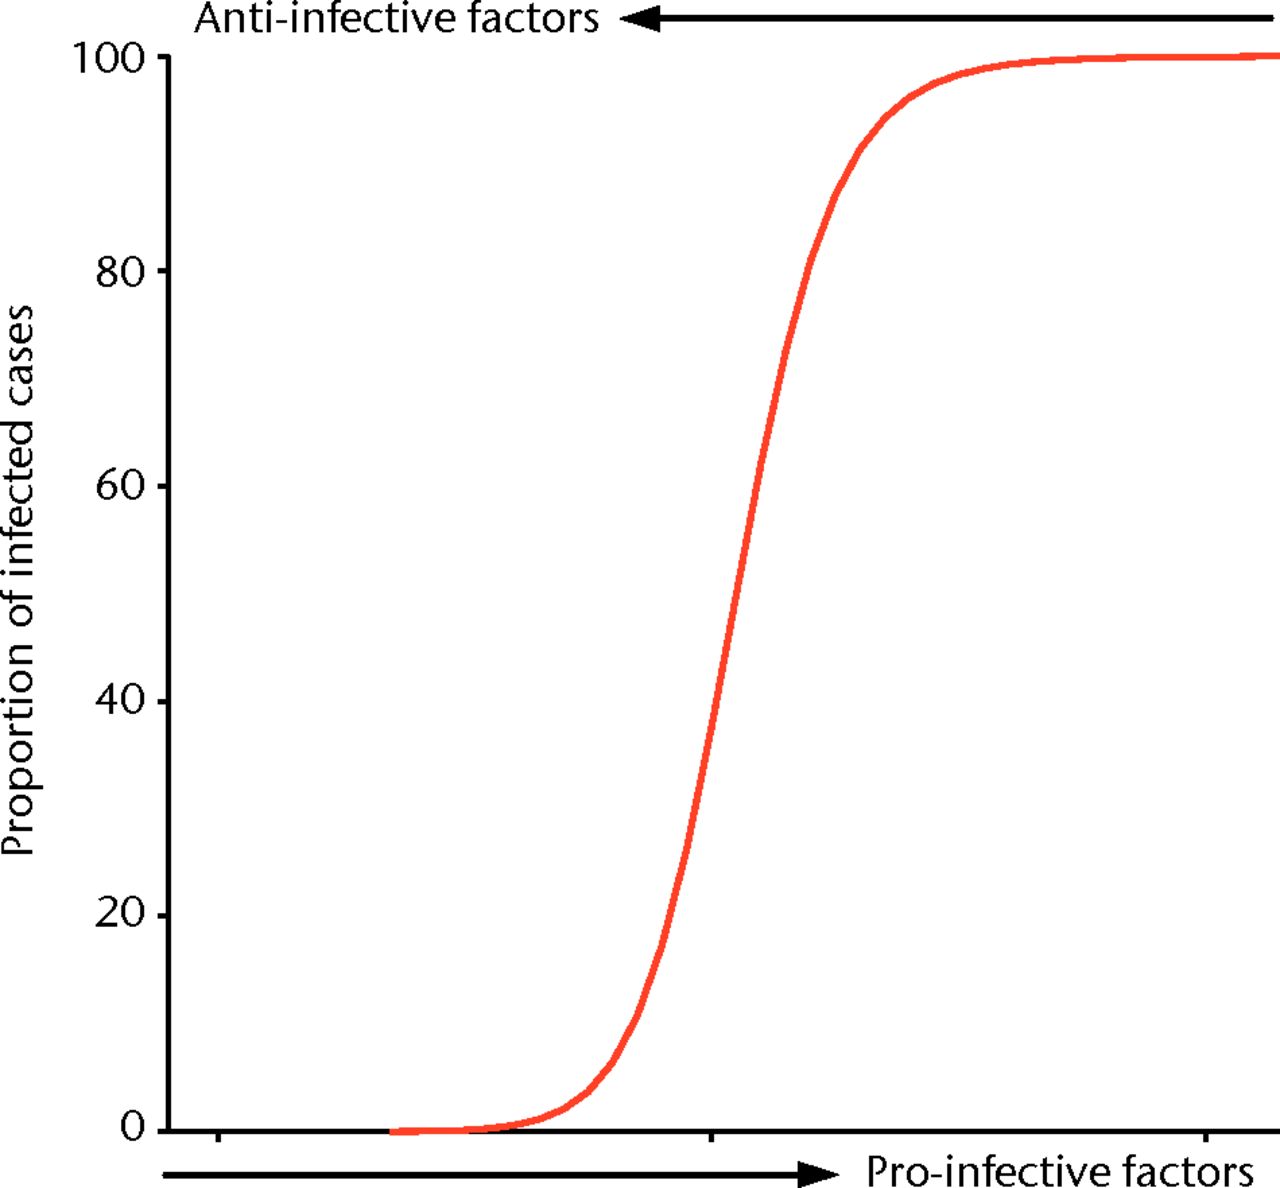 Fig. 8 
            Idealised curve representing the ‘tipping
point’ at which a host’s immune system is unable to eradicate infection
and a group of animals in a study group will move from 0% infection
to 100% infection, with a small increase in pro-infective factors
or a small decrease in anti-infective factors.
          